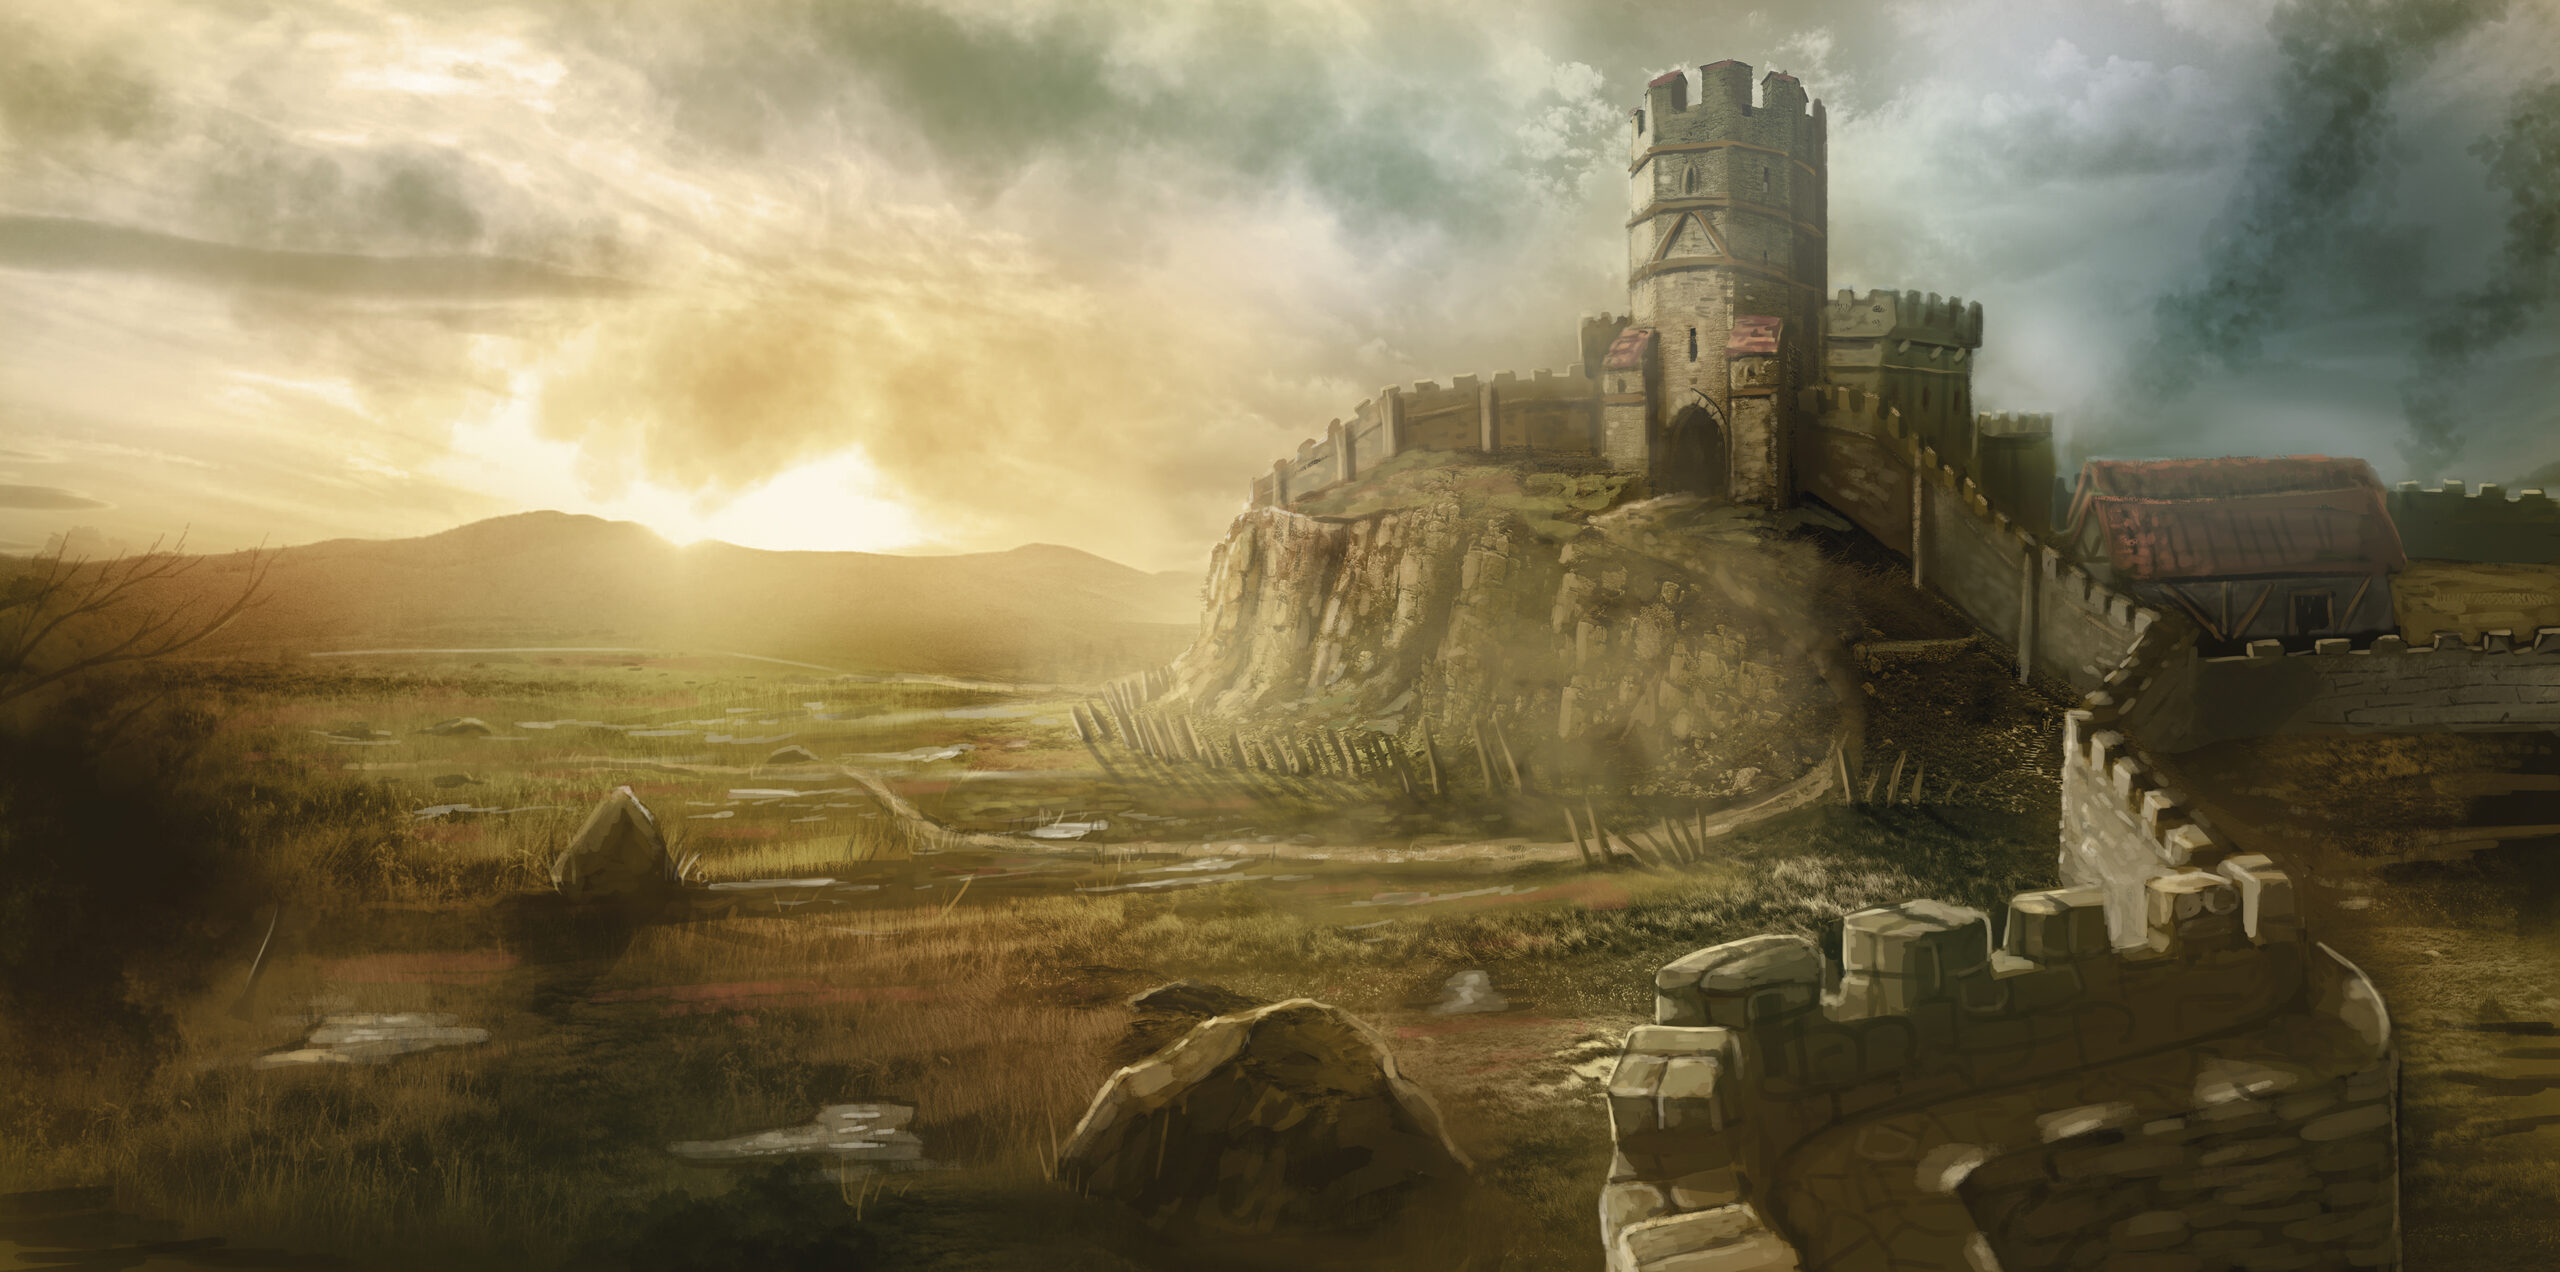 A castle on a hill for a fantasy landscape at dawn